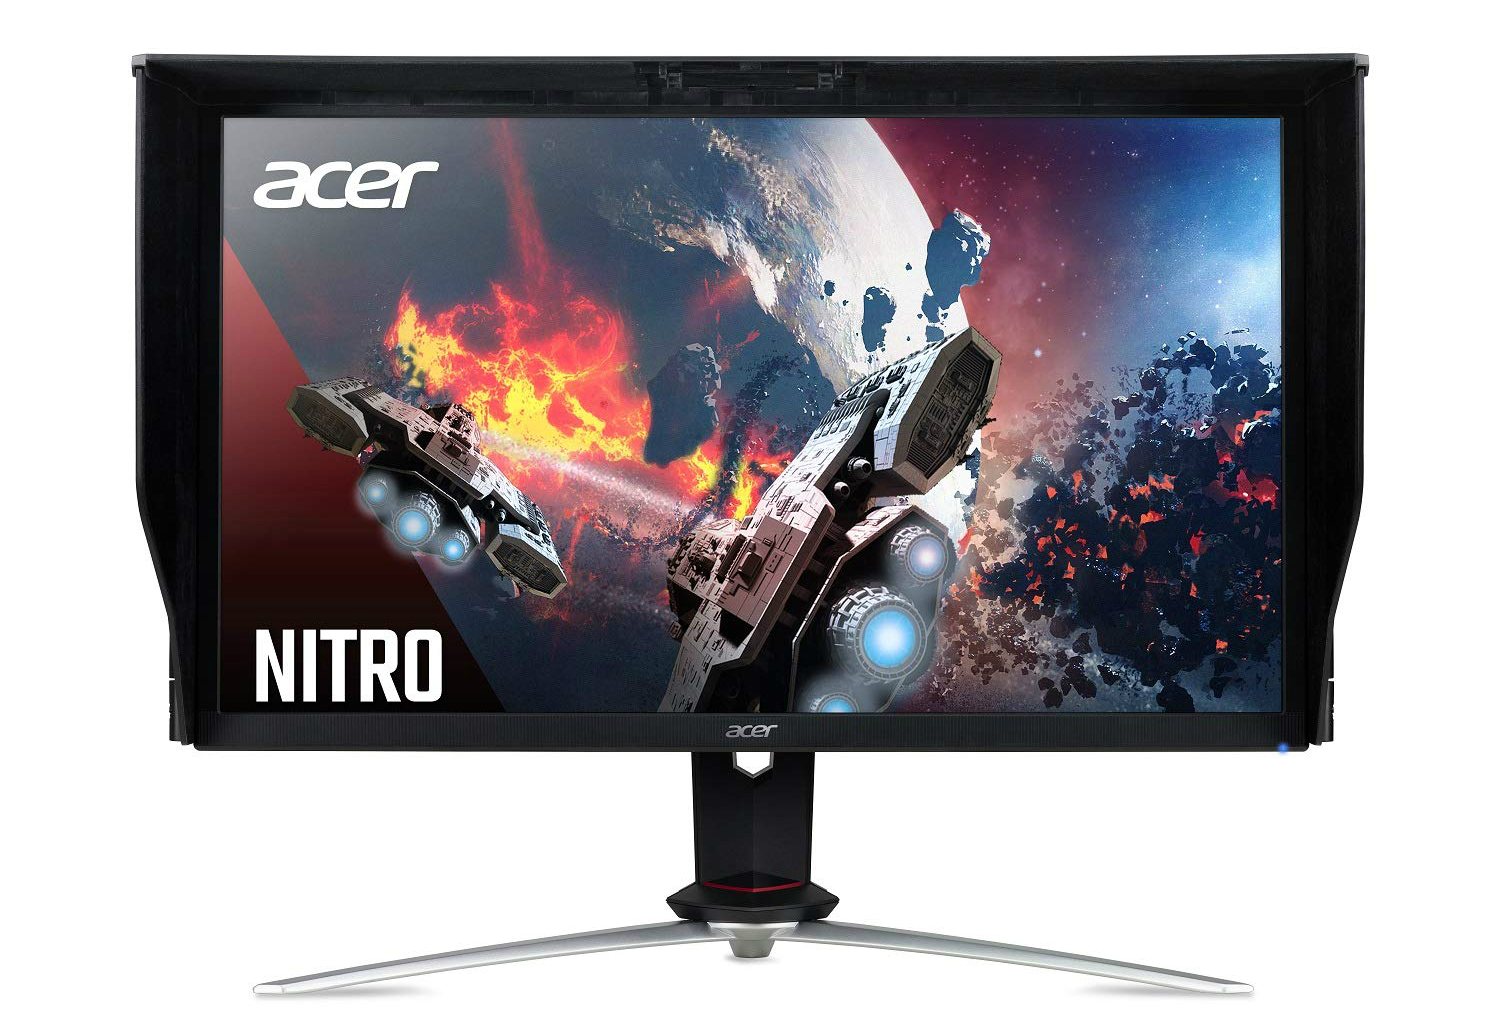 amazon slashes prices on acer laptops desktops monitors and gaming gear nitro xv273k pbmiipphzx 27 inch uhd 3840 x 2160 ips g